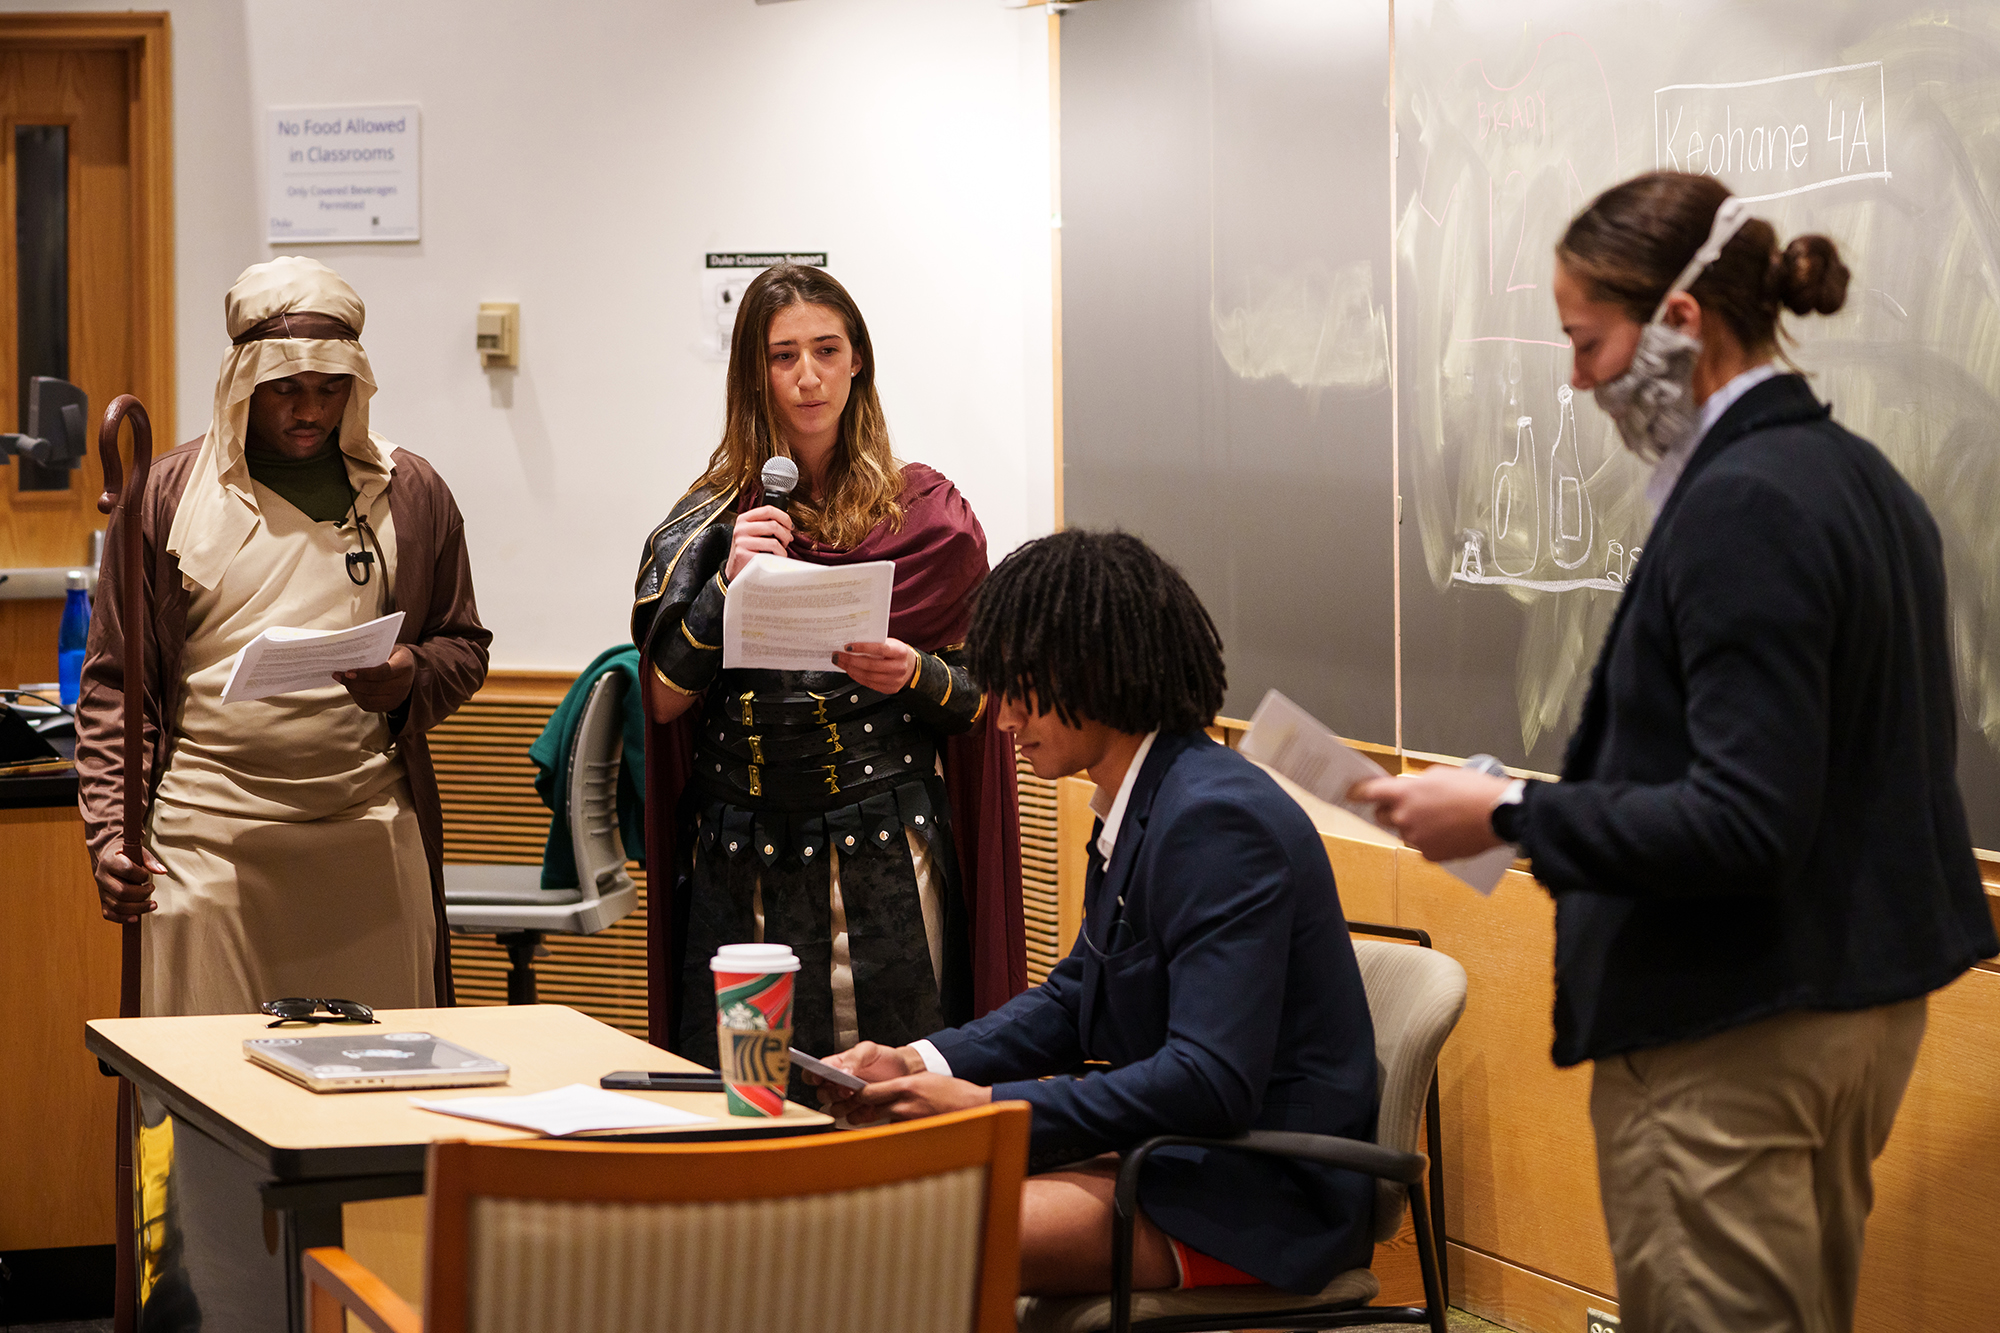 Three students dressed as philosophers and religious figures offer advice to another student in a blazer, sitting at a desk.